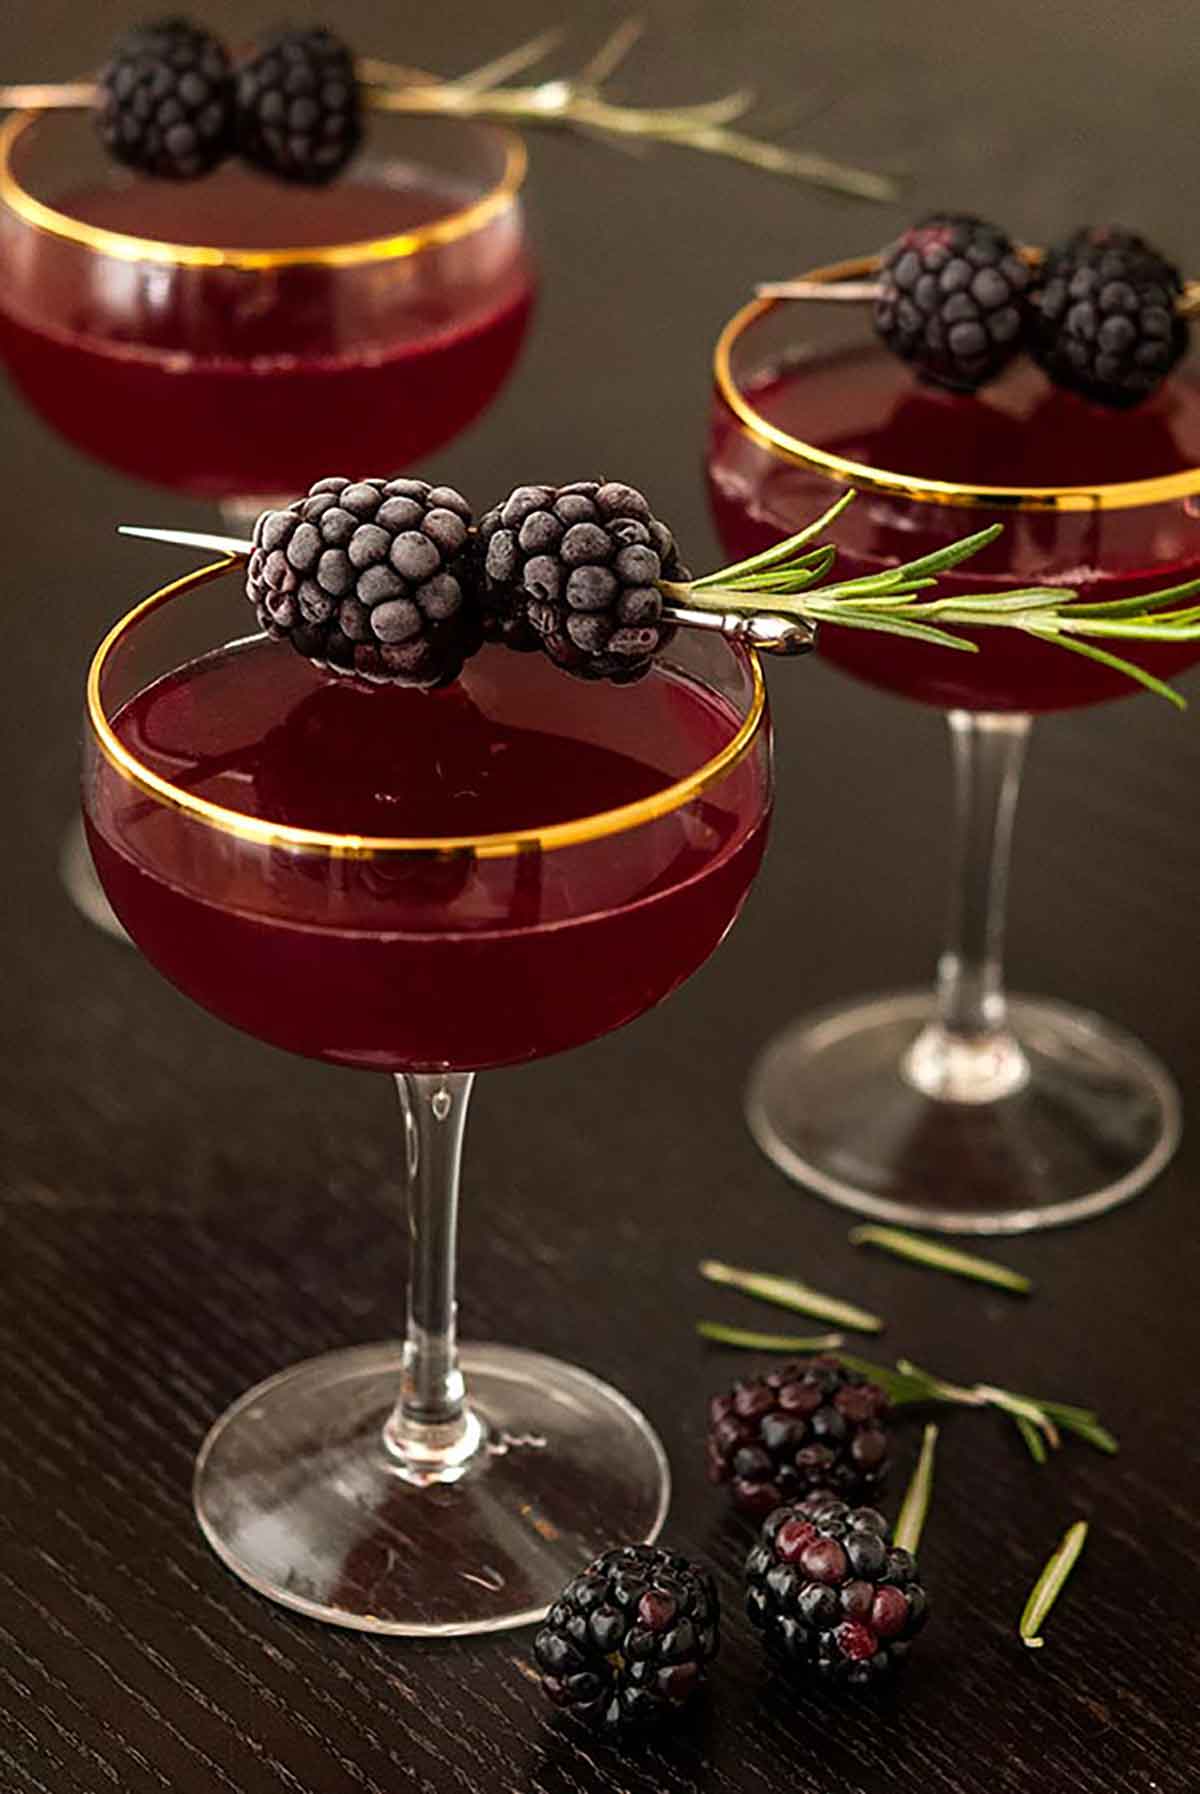 3 cocktails on a table surrounded by a few scattered blackberries, and garnished with frosted blackberries and rosemary.